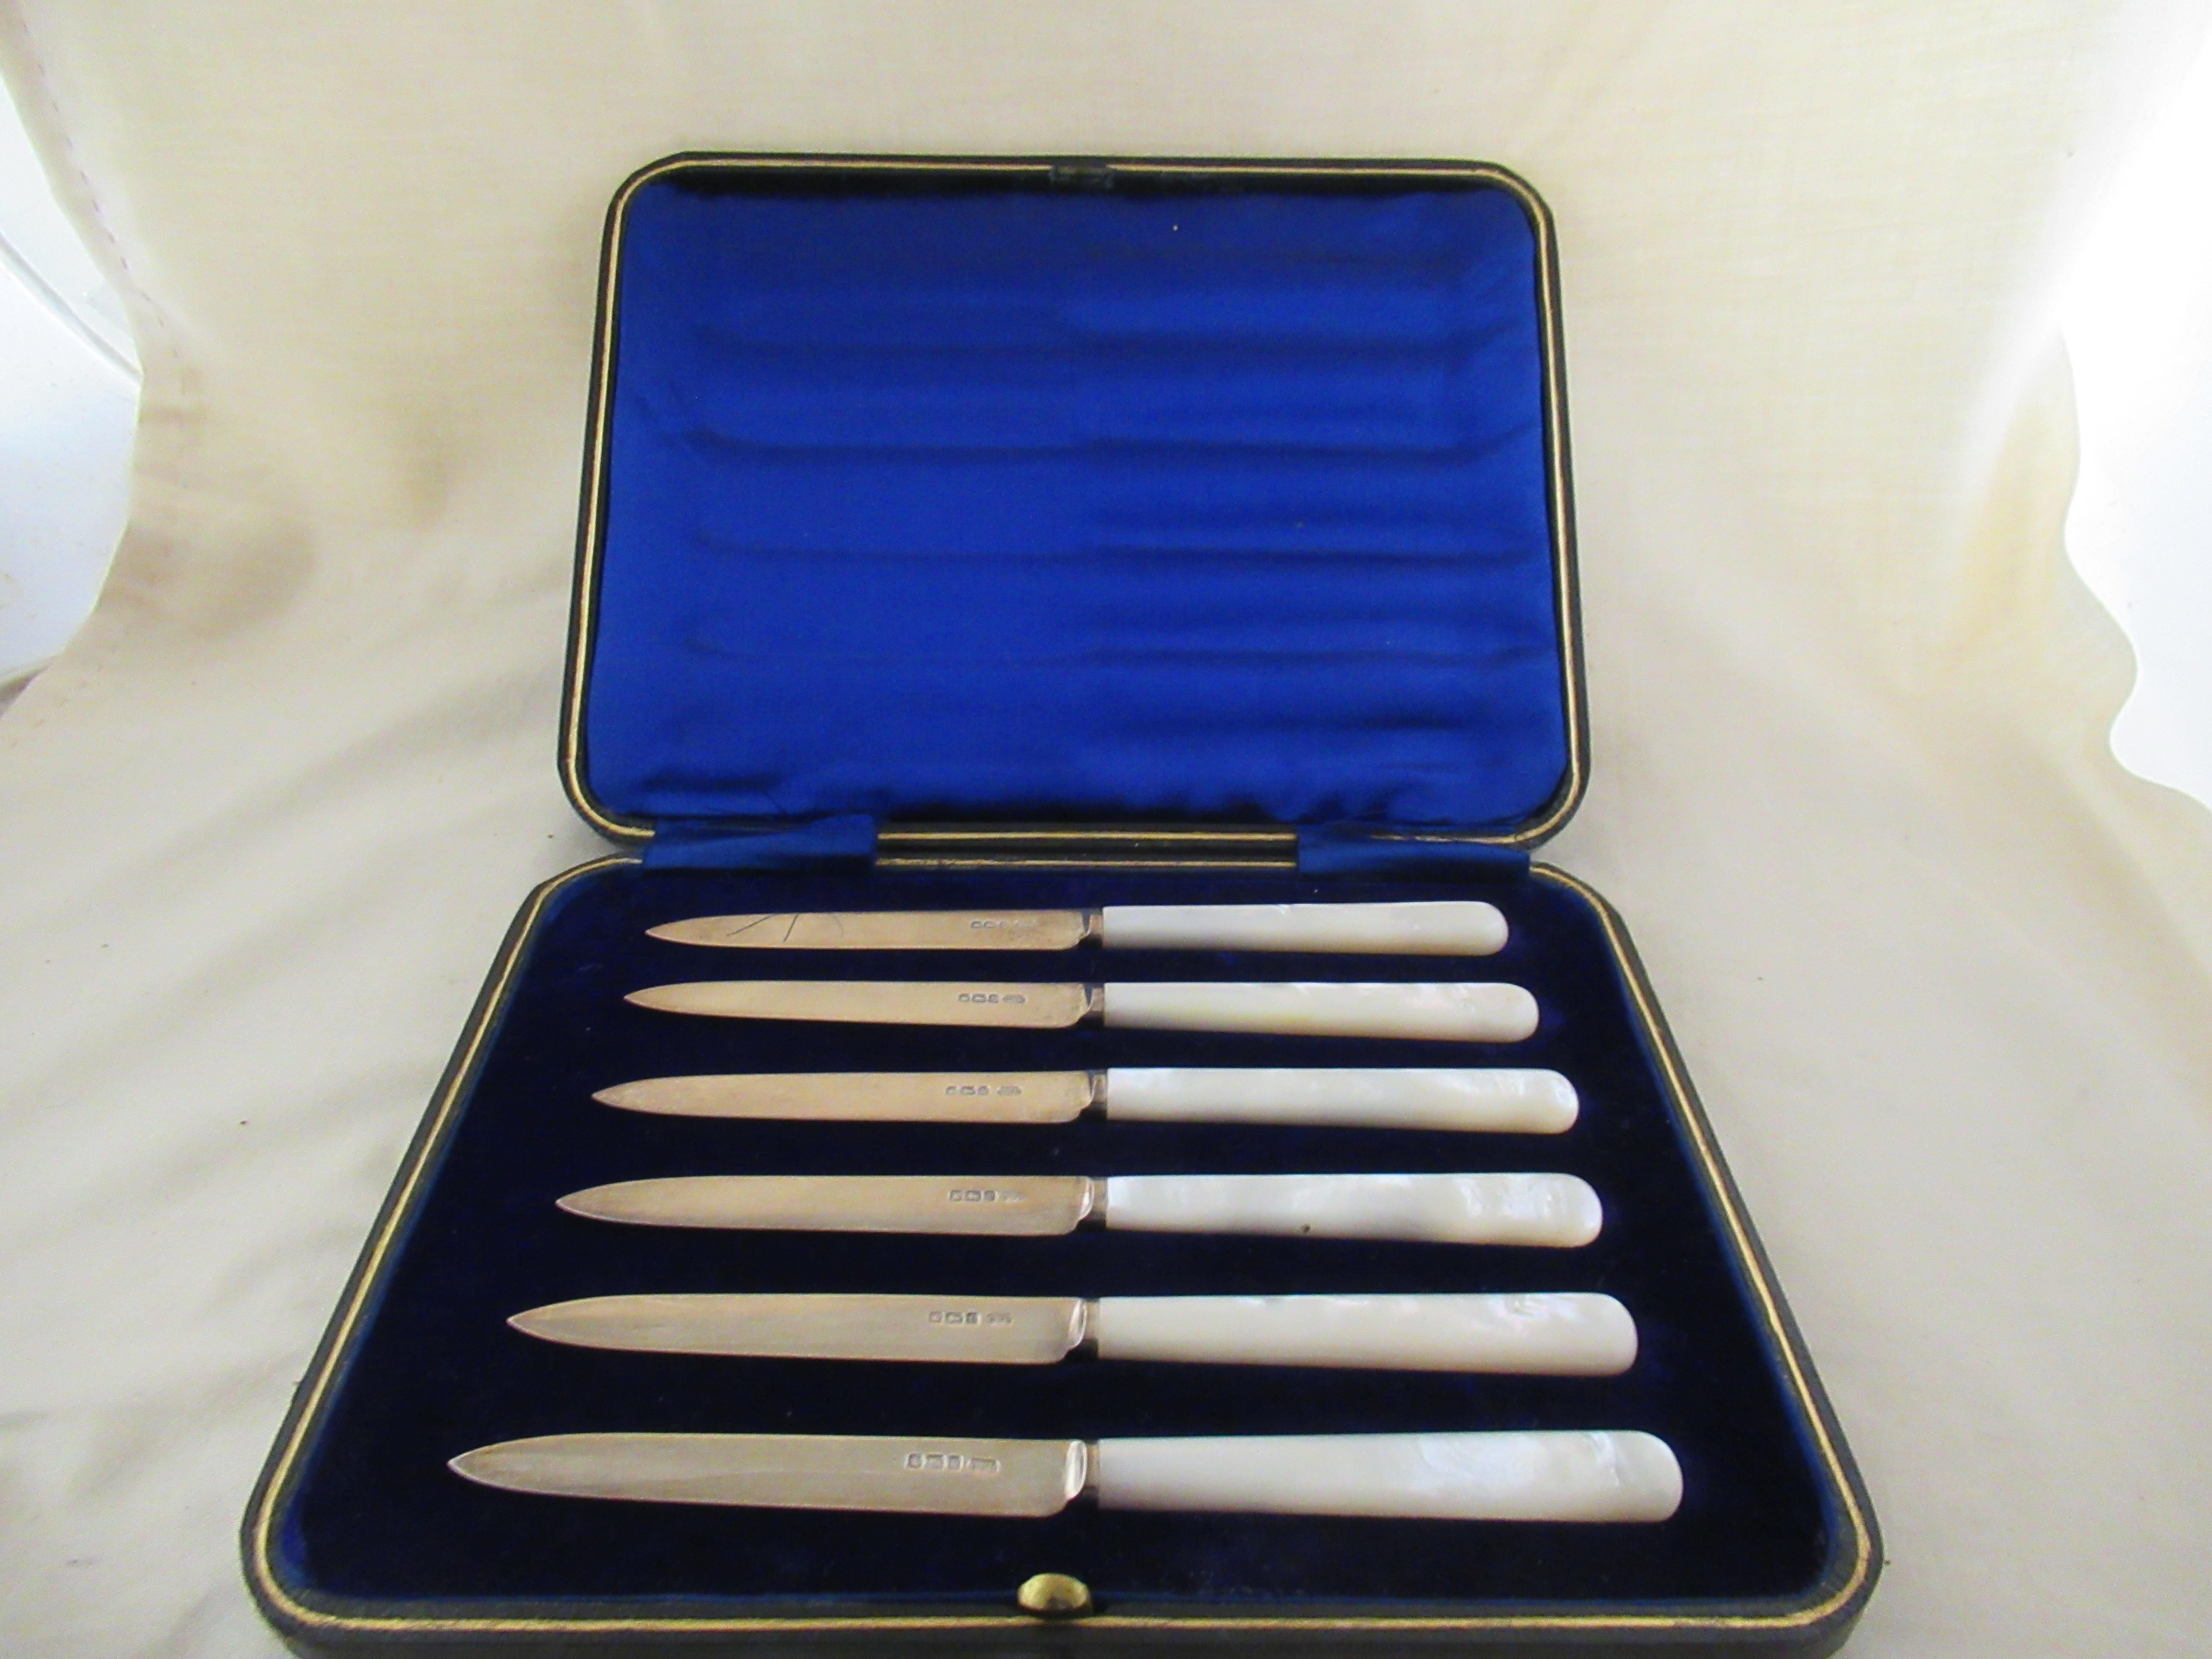 English Sterling Silver    Box of 6 TEA KNIVES
Full set of English hallmarks, applied by the Sheffield Assay Office.:- 
                                                 Crown - Sheffield Assay Office
                                                 